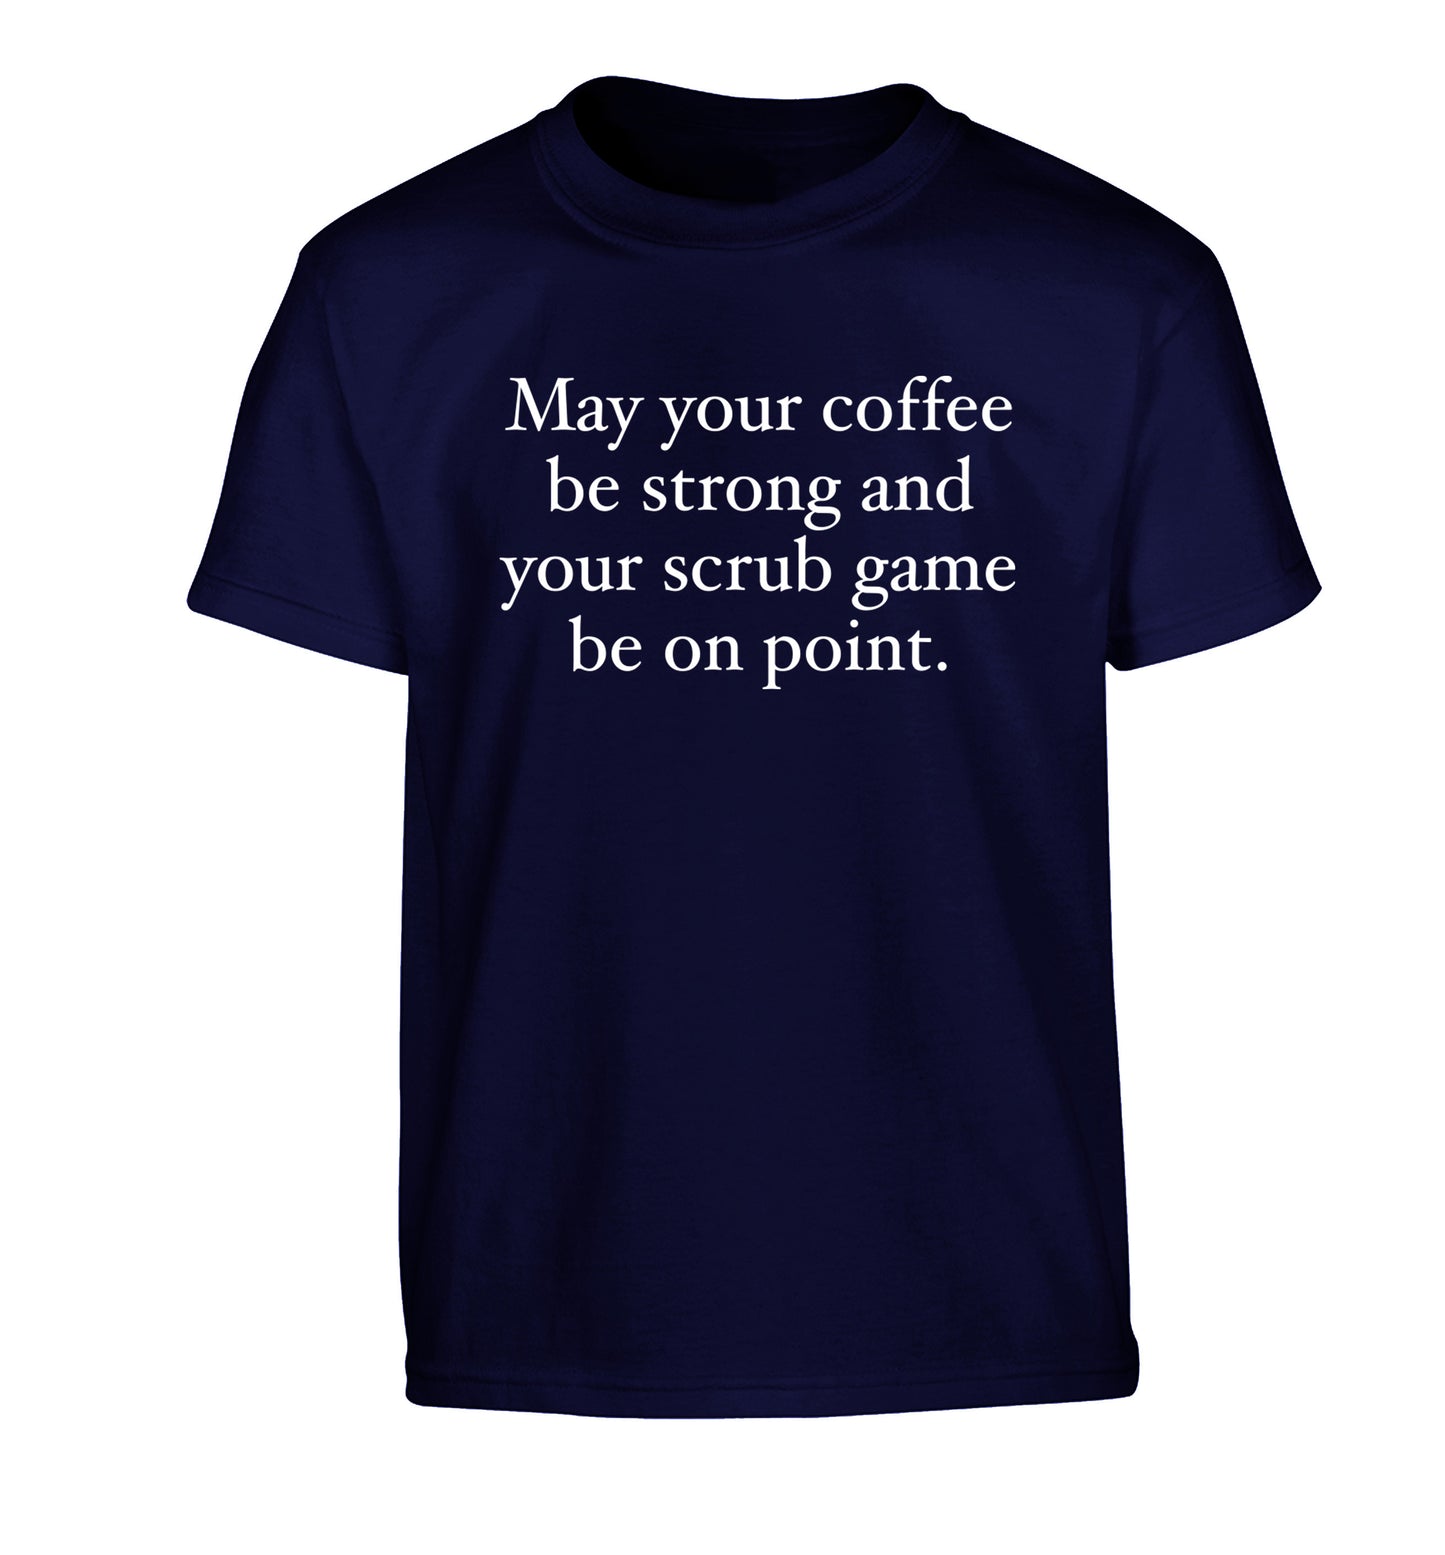 May your caffeine be strong and your scrub game be on point Children's navy Tshirt 12-14 Years